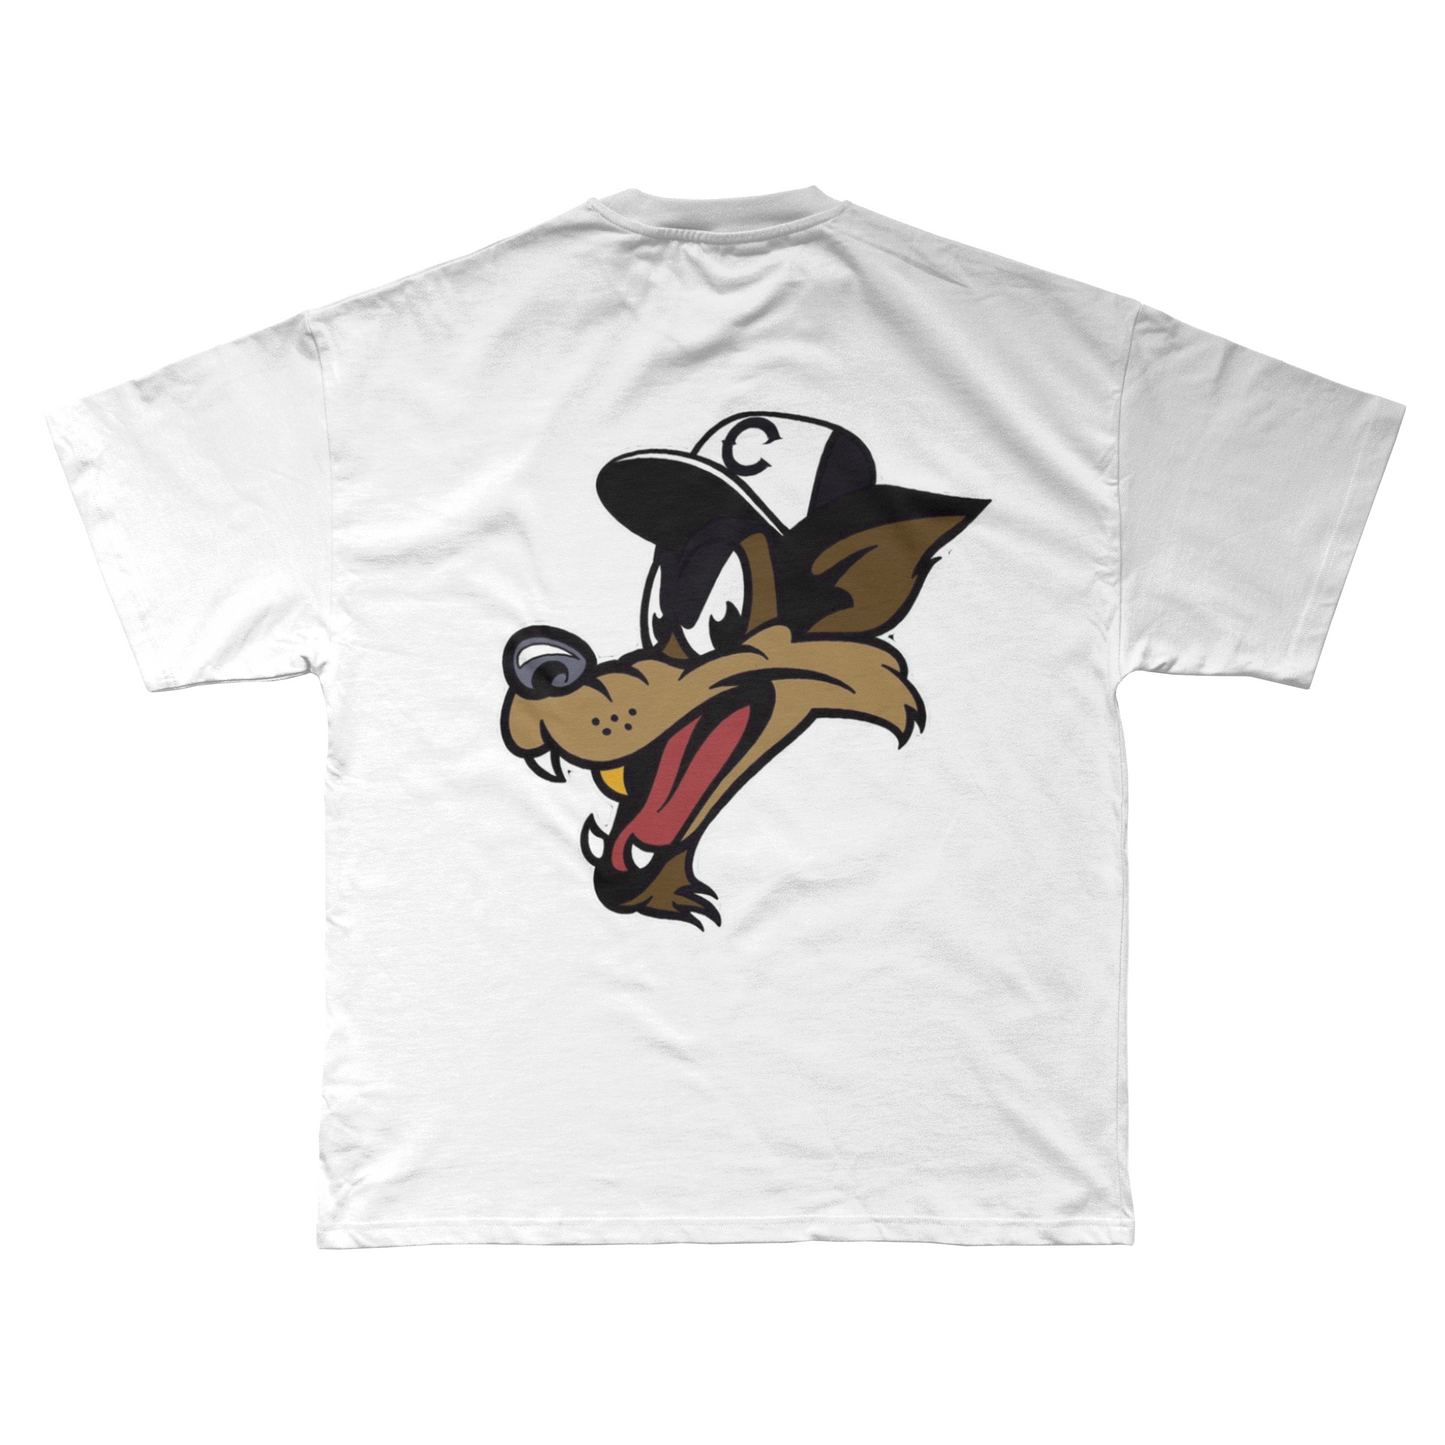 The Official Coyote Pocho Shirt